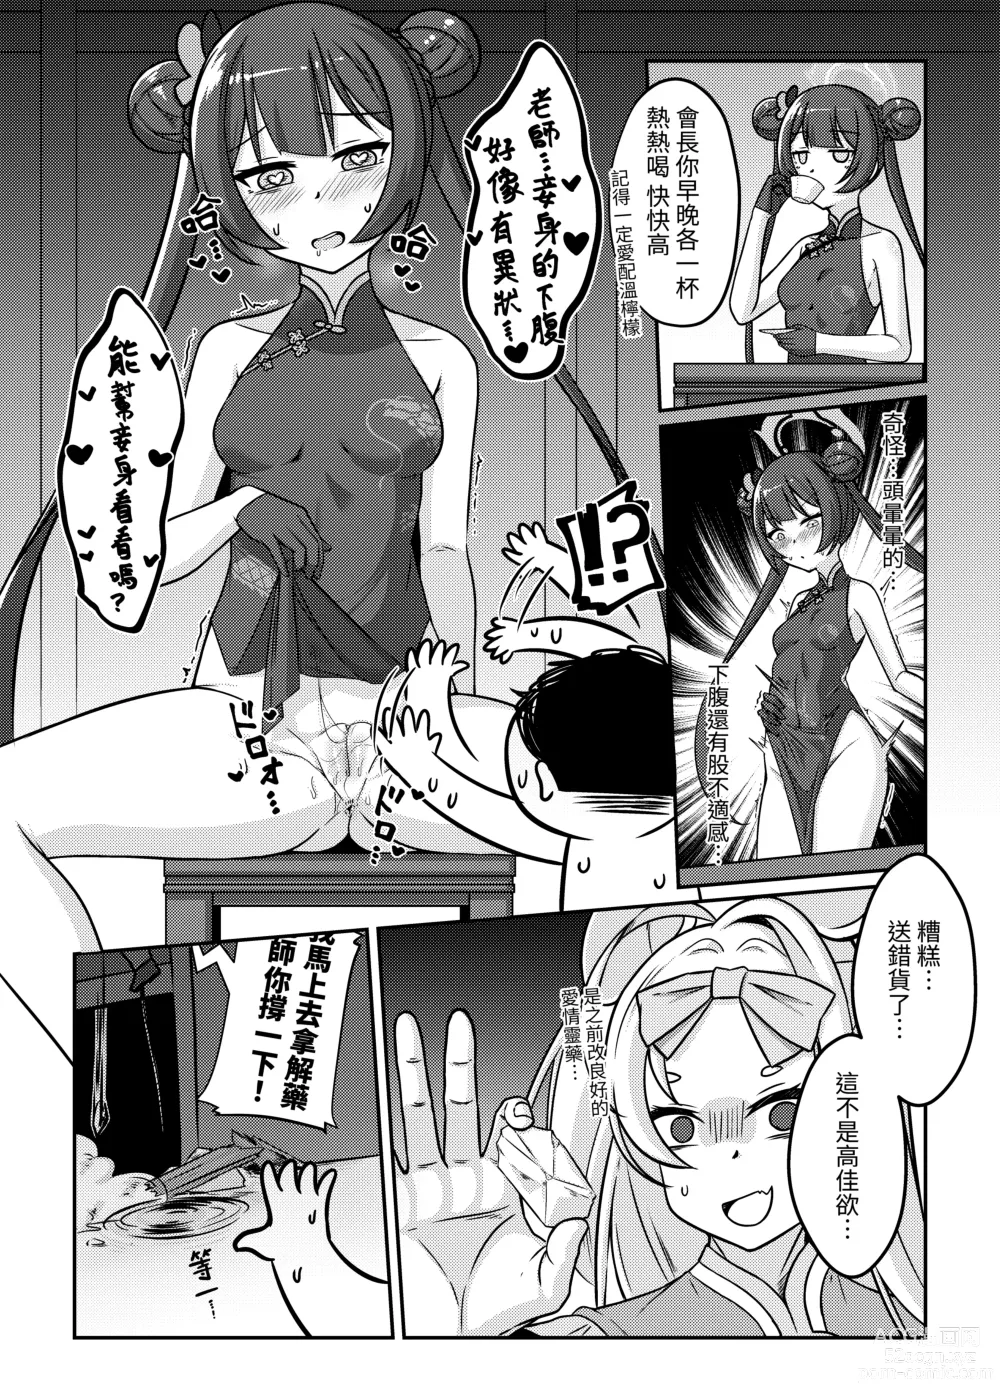 Page 6 of doujinshi 絕命狼師